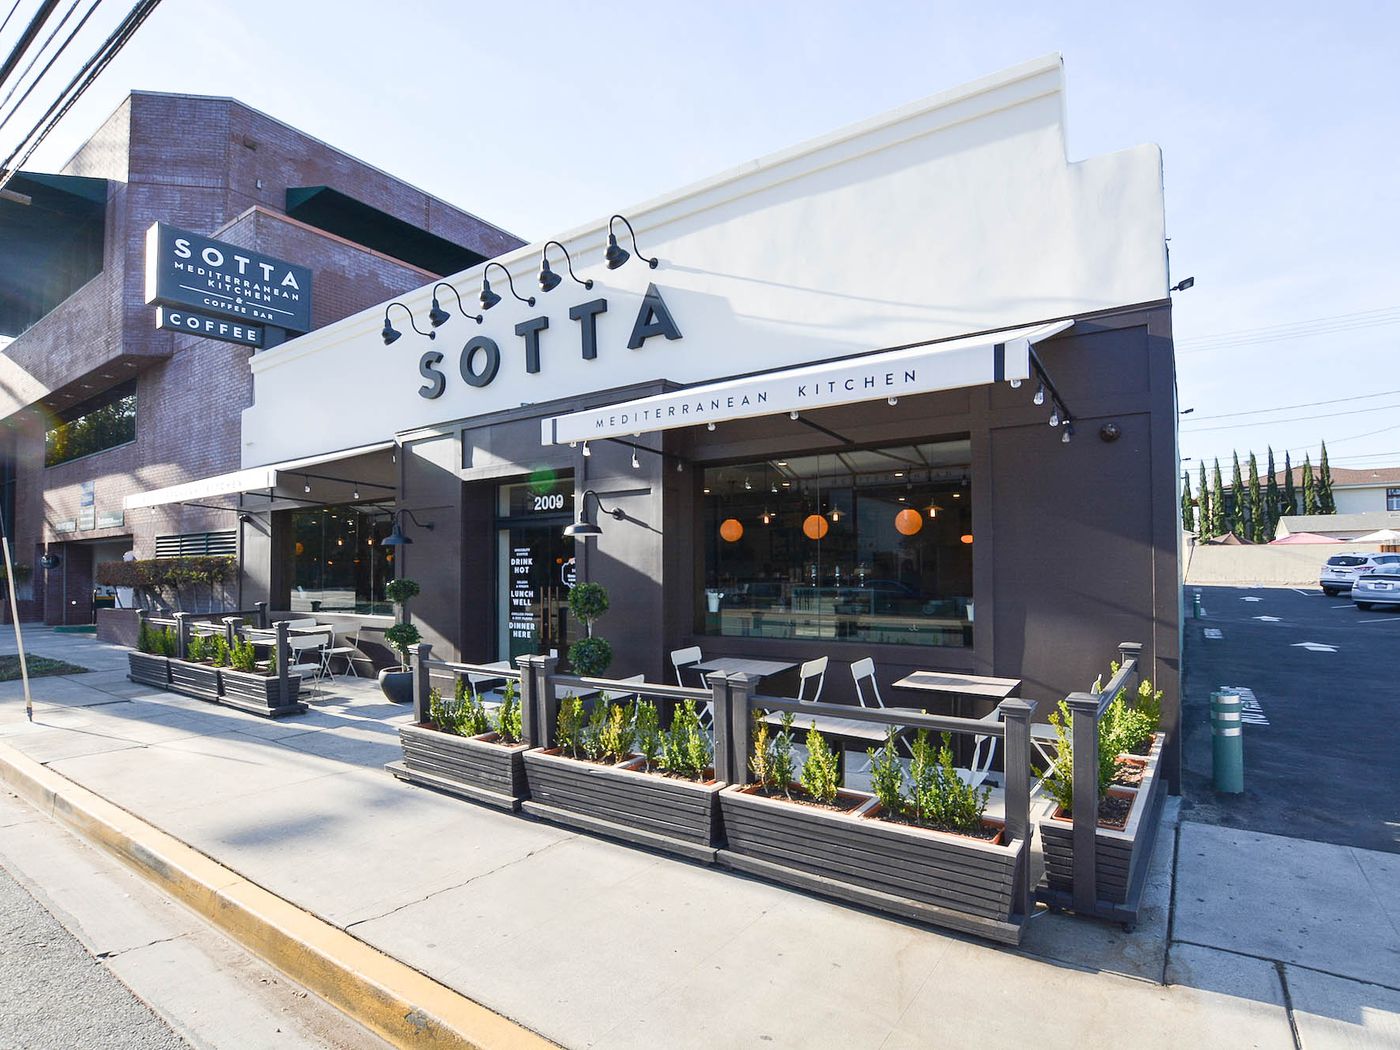 Outside Patio at Sotta